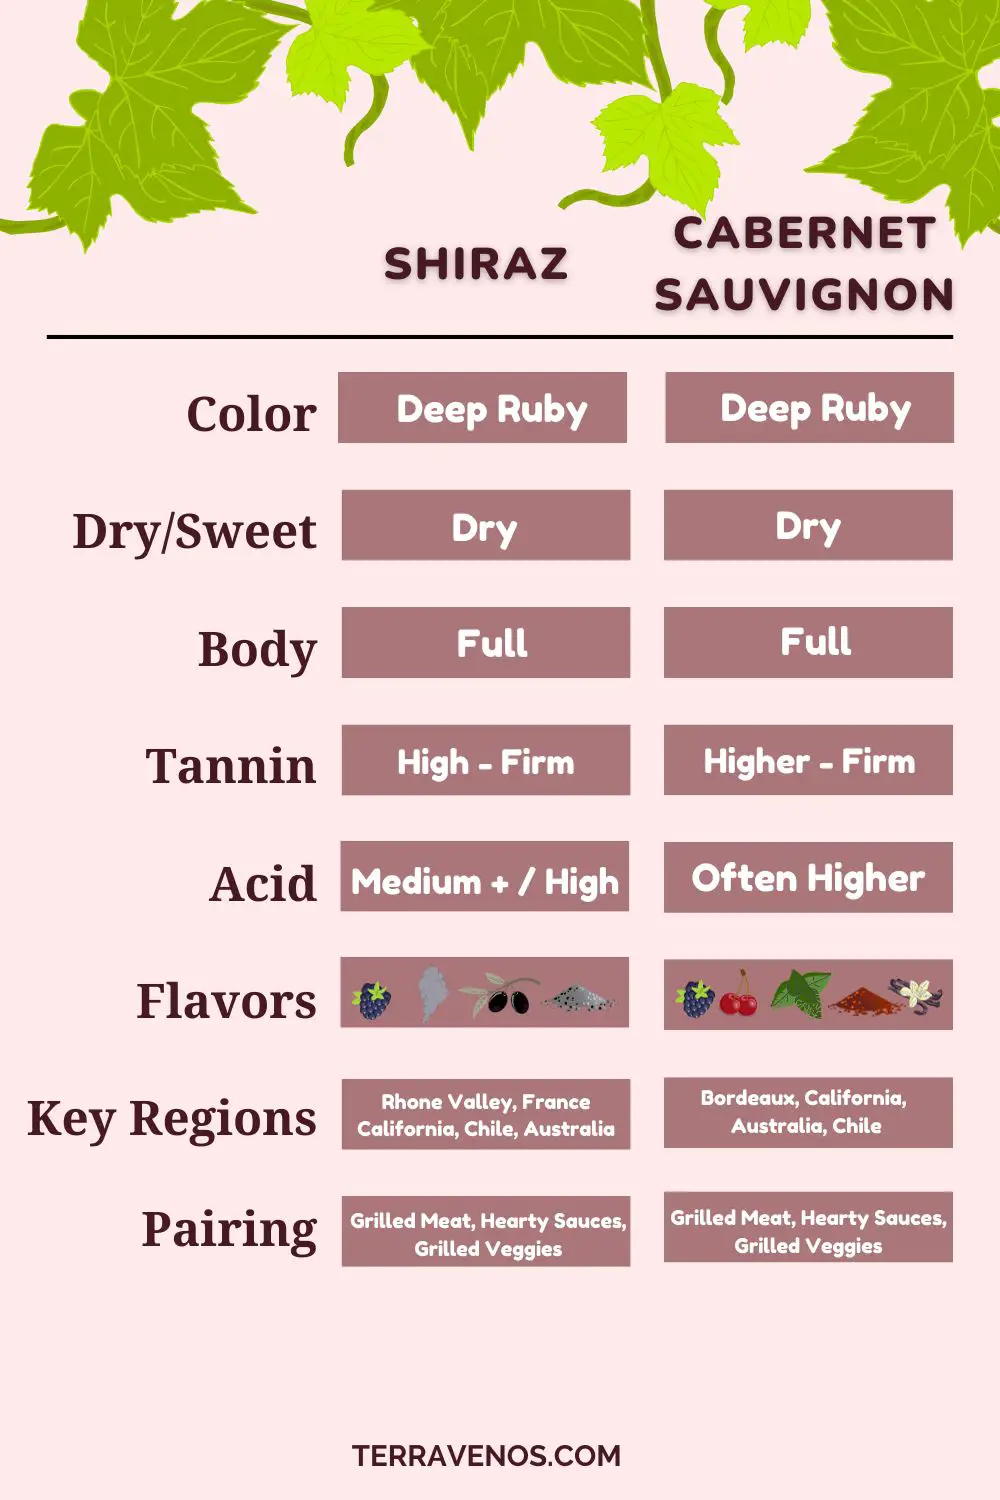 difference between shiraz and cabernet sauvignon - infographic